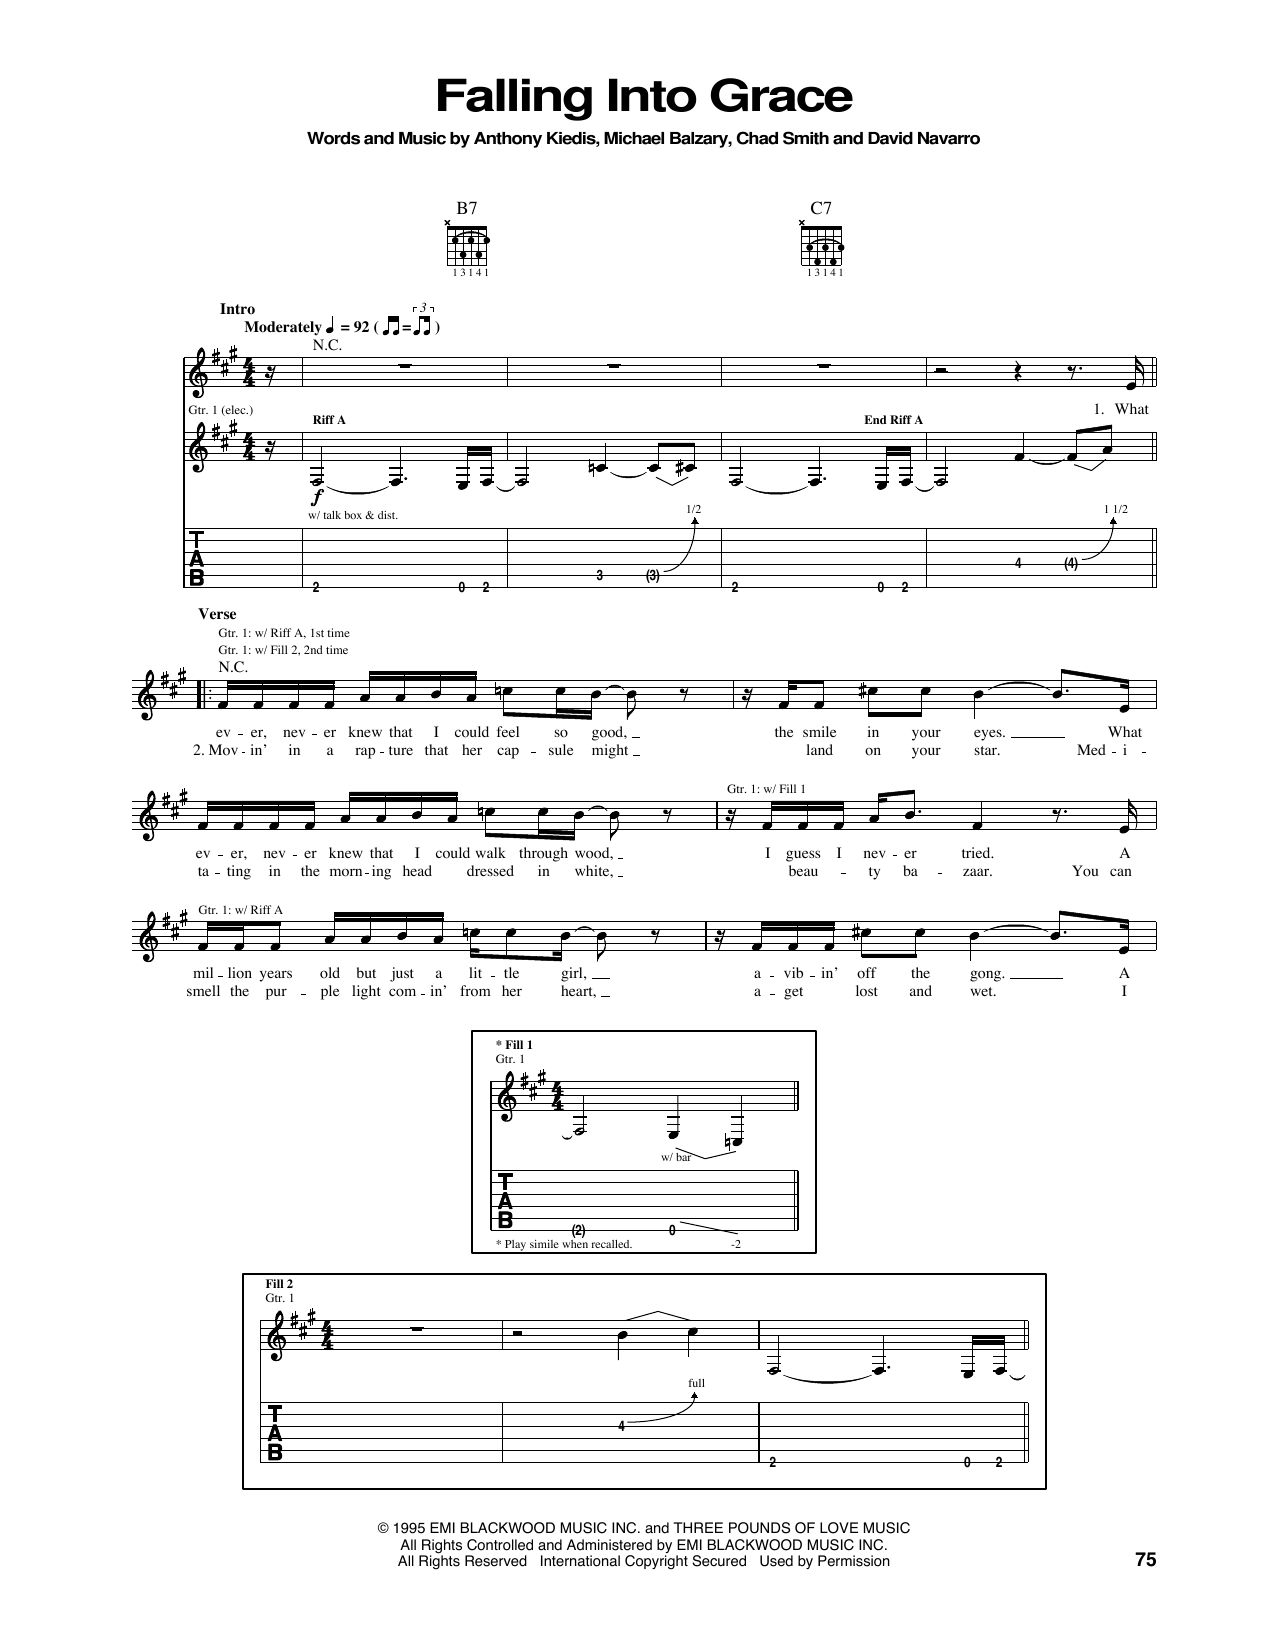 Download Red Hot Chili Peppers Falling Into Grace Sheet Music